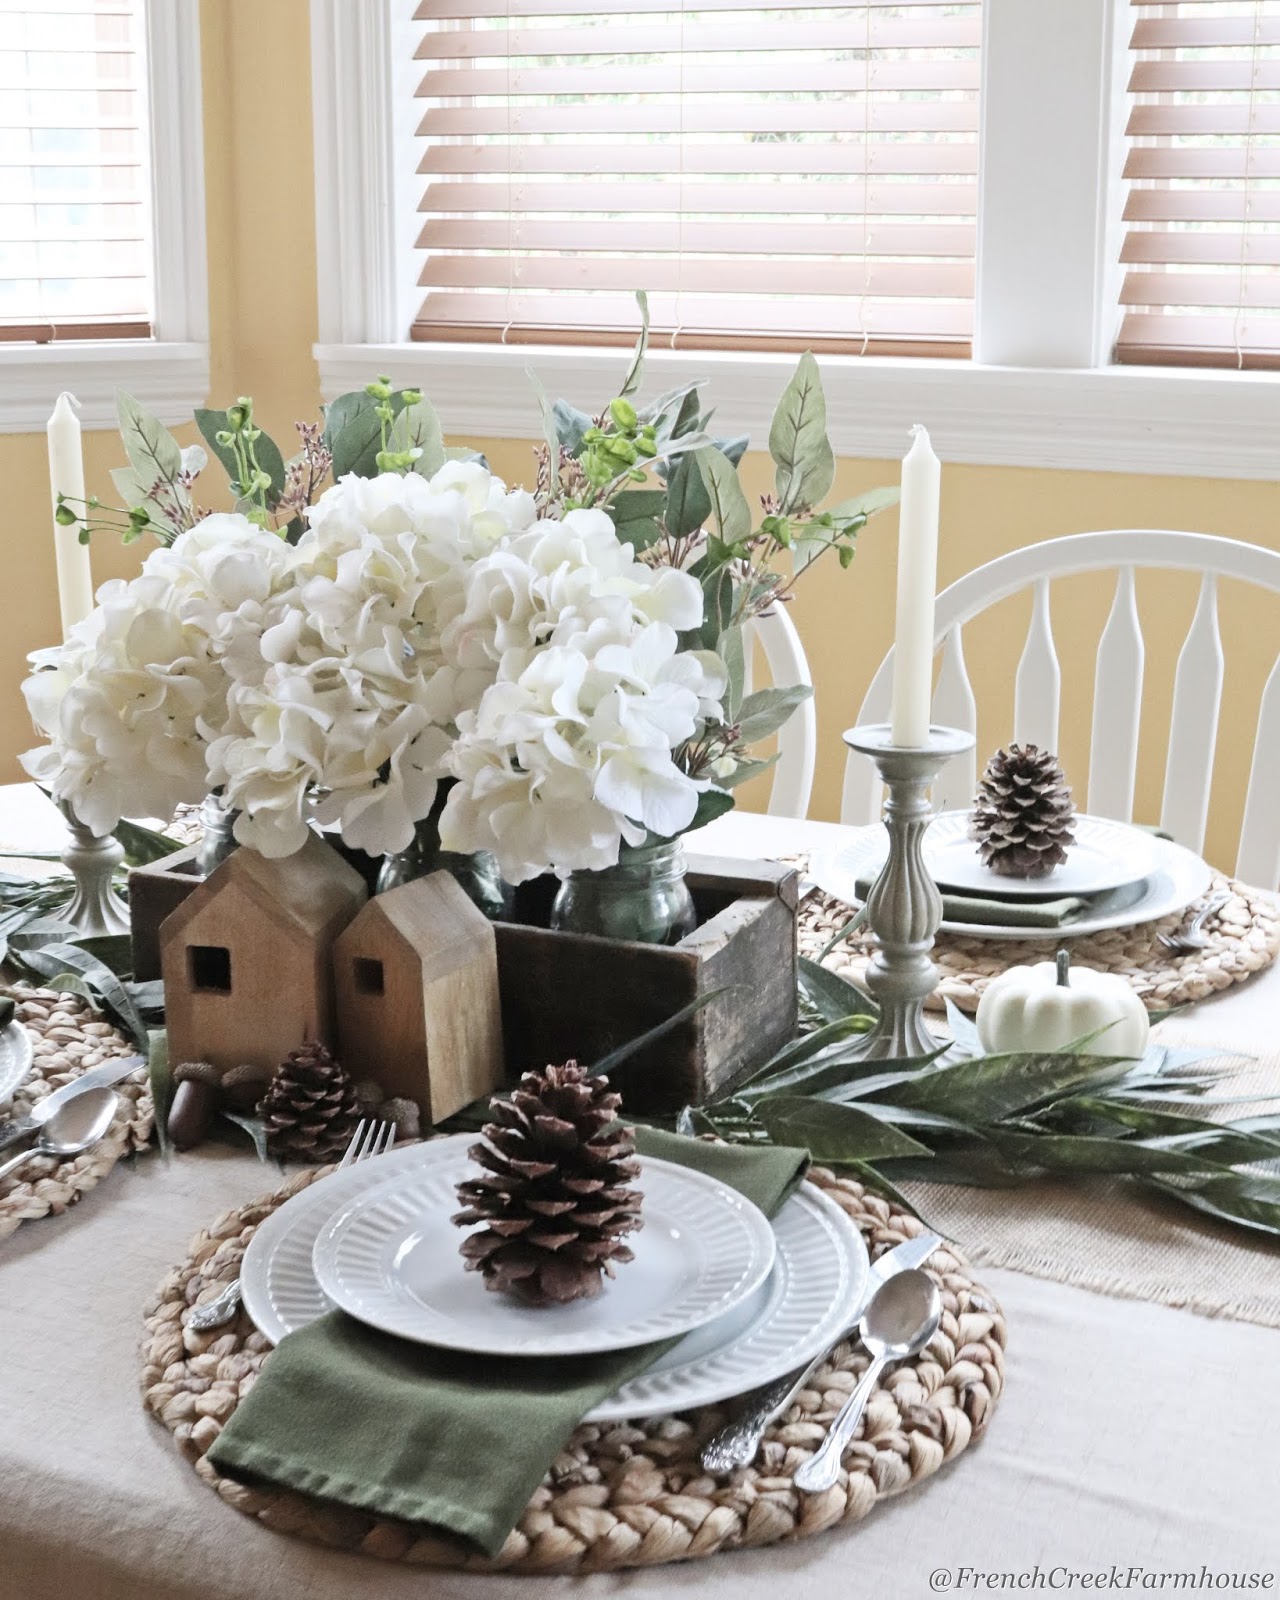 A simple fall tablescape is a wonderful way to decorate for fall without spending a lot of money